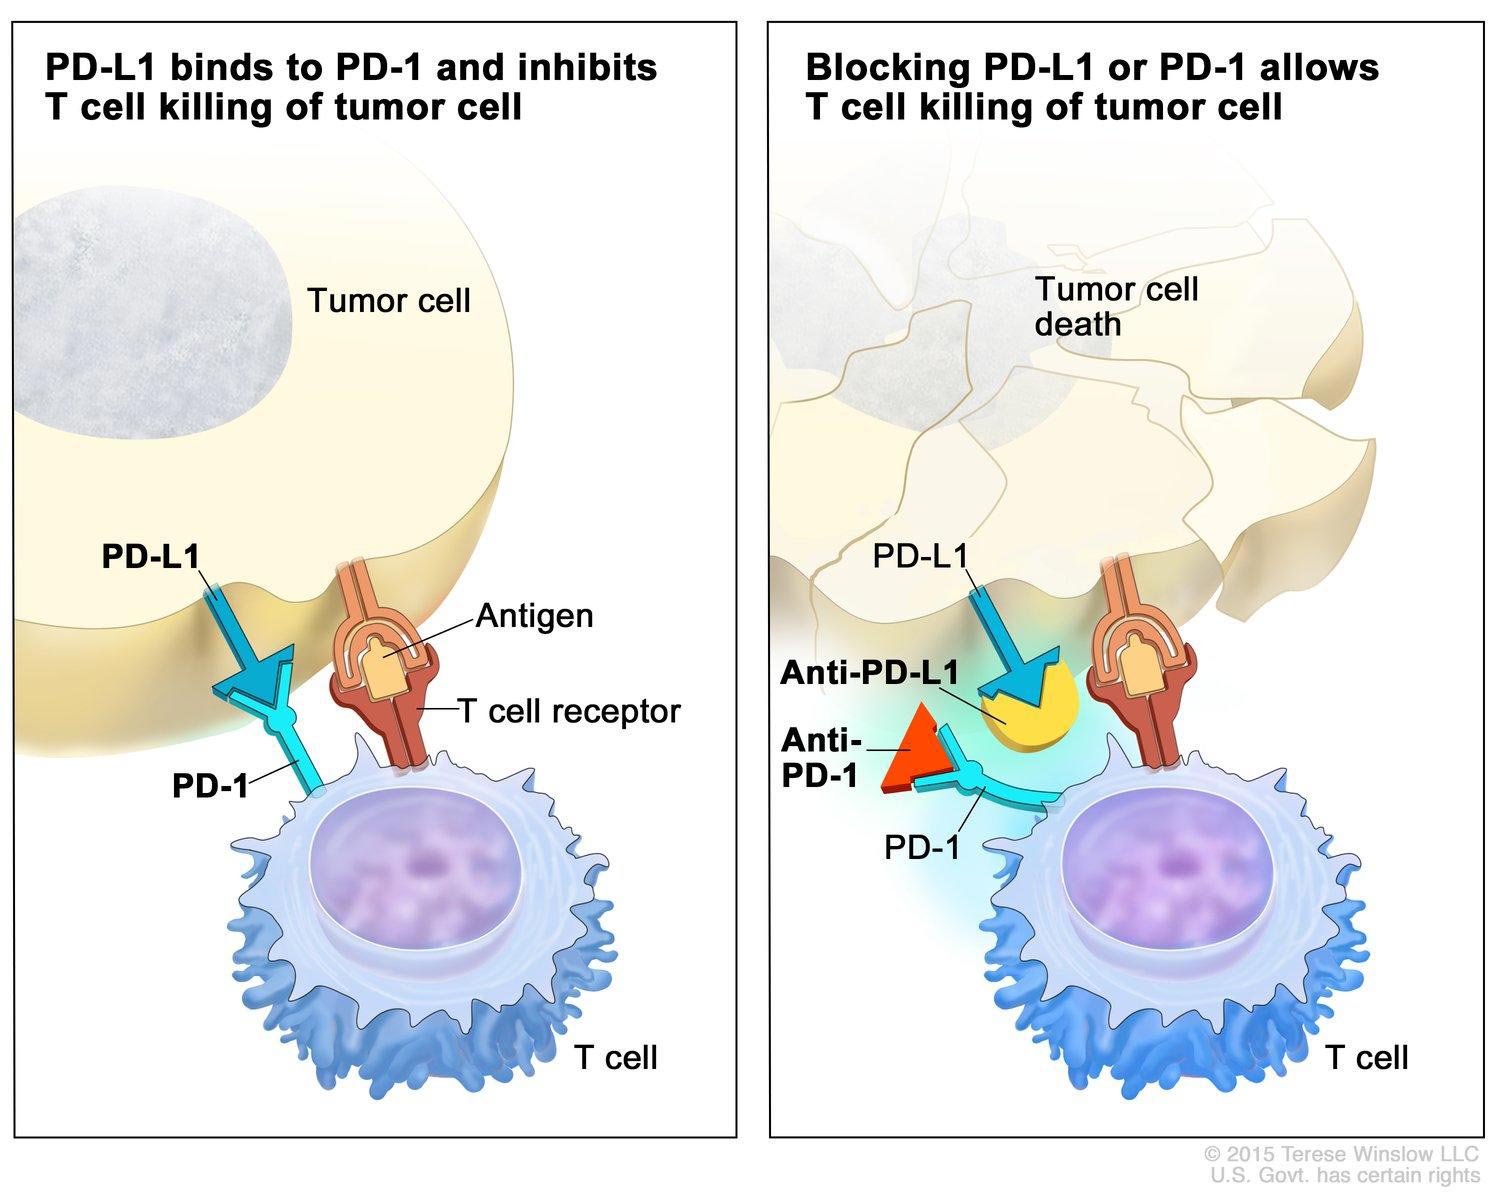 At left: A T cell has recognized a tumor cell as foreign (T cell receptor has bound to tumor cell antigen) but fails to attack because checkpoint proteins have interacted: The tumor’s PD-L1 protein has bound to the T cell’s PD-1 protein, putting the brakes on T cell activity. At right: In immunotherapy, monoclonal antibodies block checkpoint protein interactions so that T cells remain active to kill tumor cells. Here, one type of monoclonal antibody (Anti-PD-L1) has been designed to bind to the tumor’s PD-L1 protein, and another type (Anti-PD-1) works by binding to the T cell’s PD-1 protein.